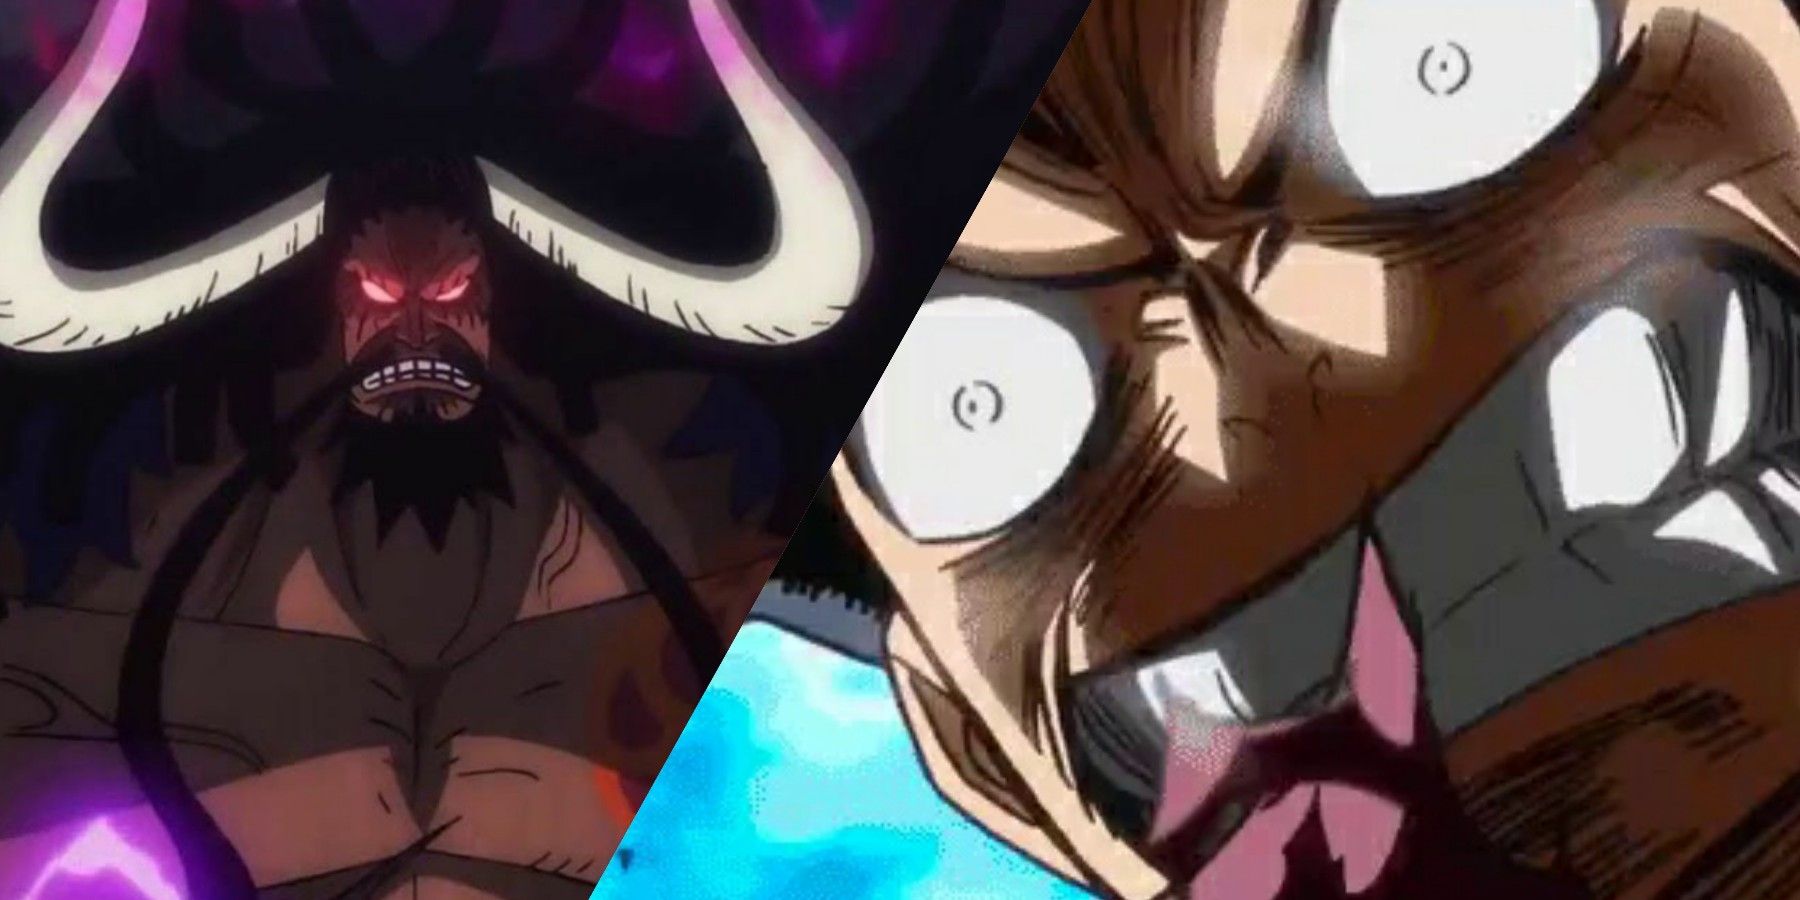 Featured Bravest One Piece Characters Luffy Kaido